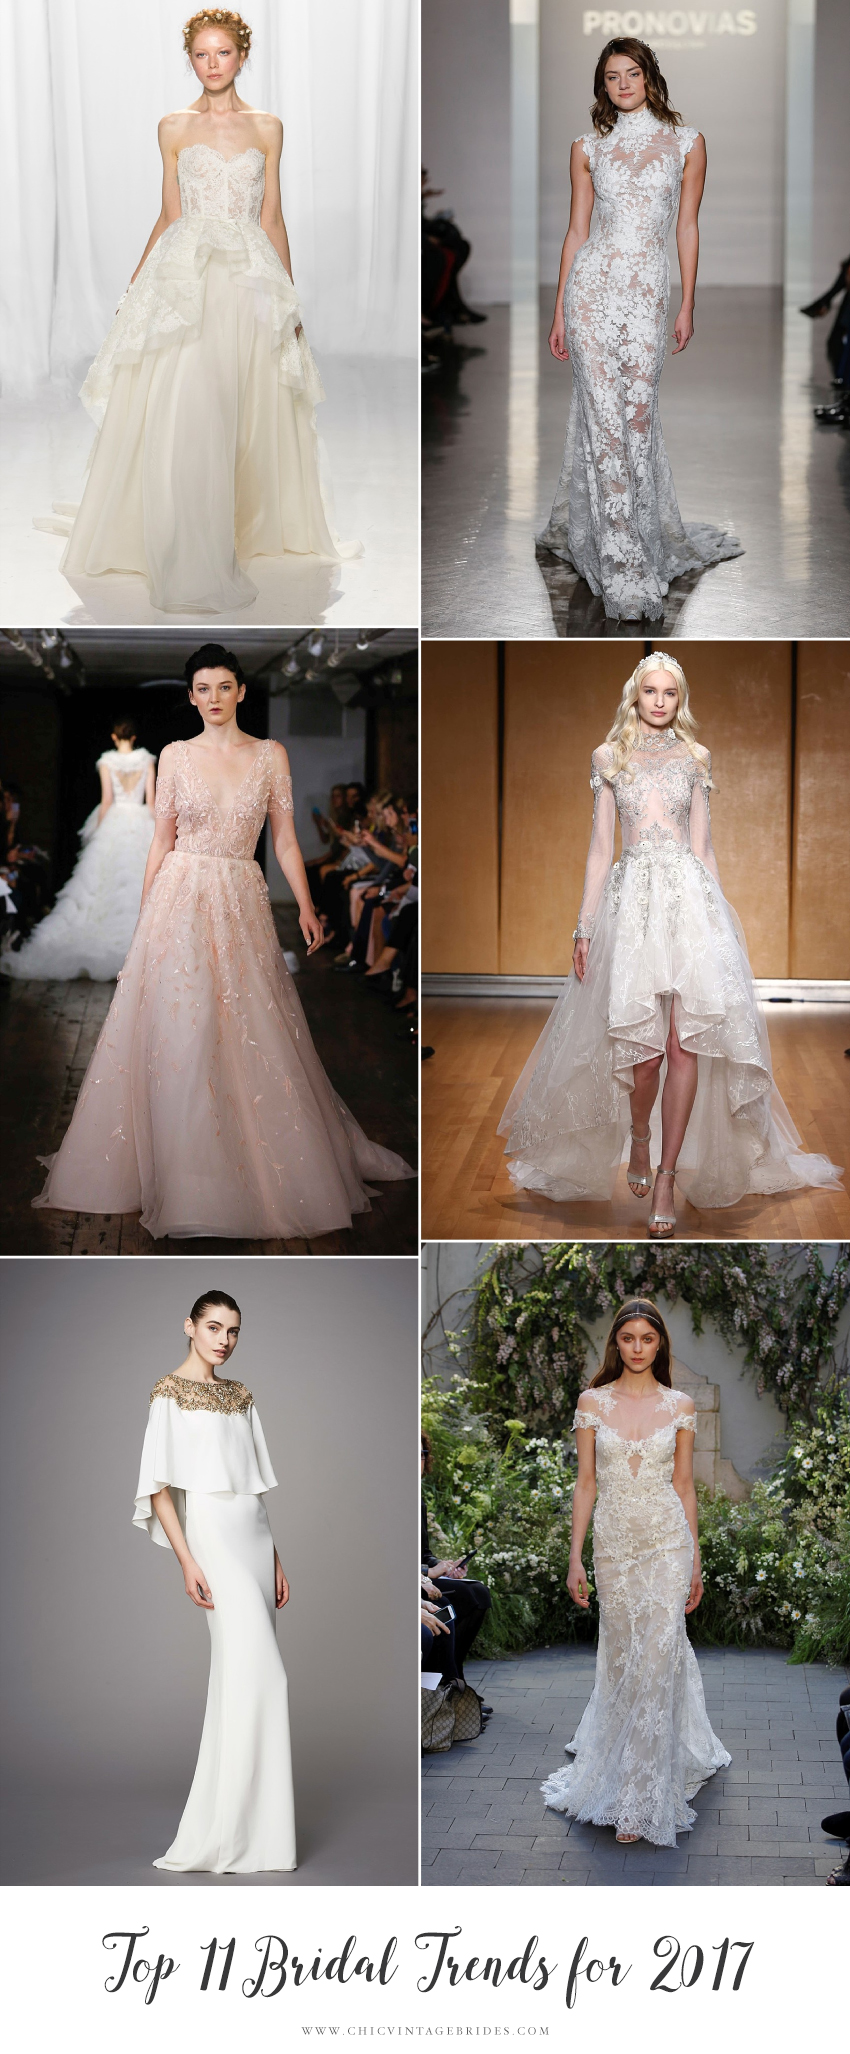 Top 11 Bridal Trends for 2017